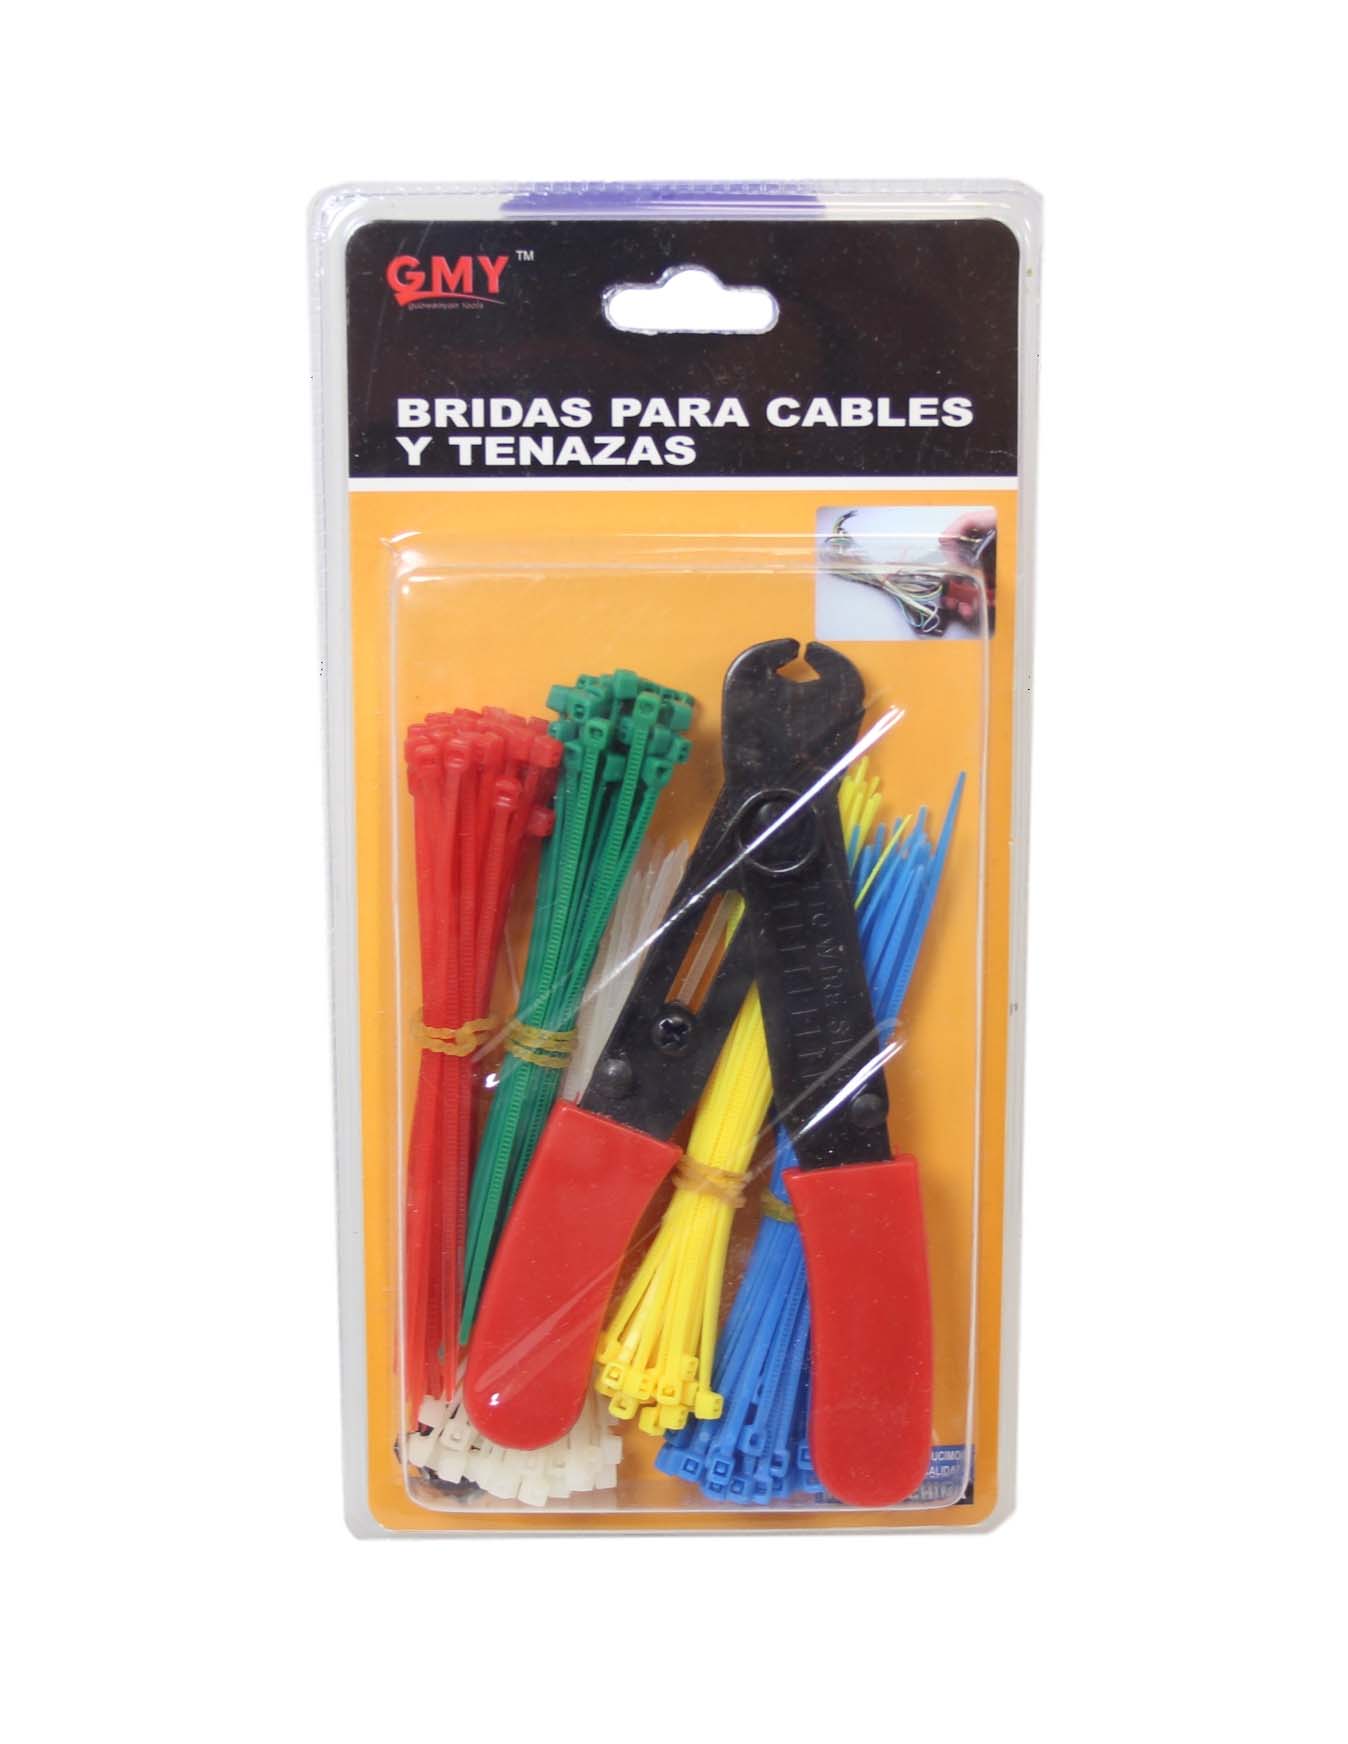 Cable Tie Set With Cutter Assorted Colour And Sizes Set Builders DIY Kit 6559 (Parcel Rate)